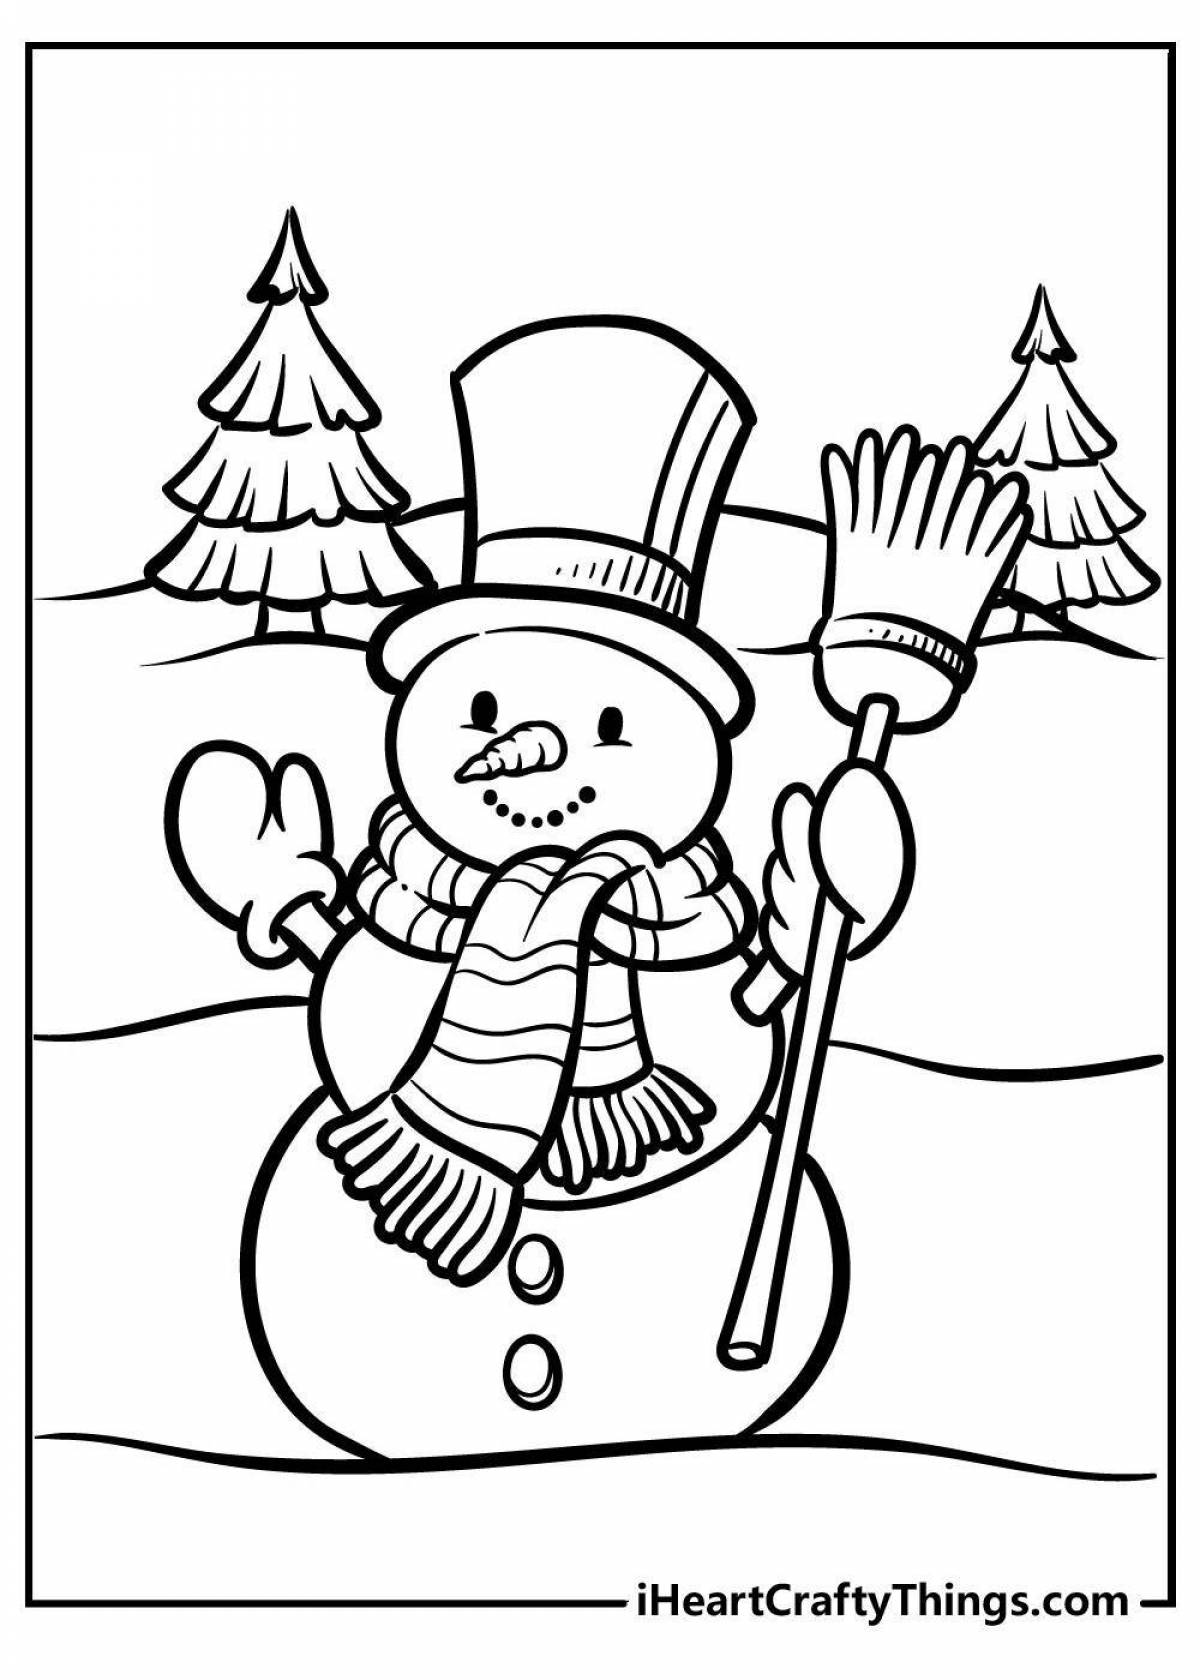 Coloring book snowman on a sled